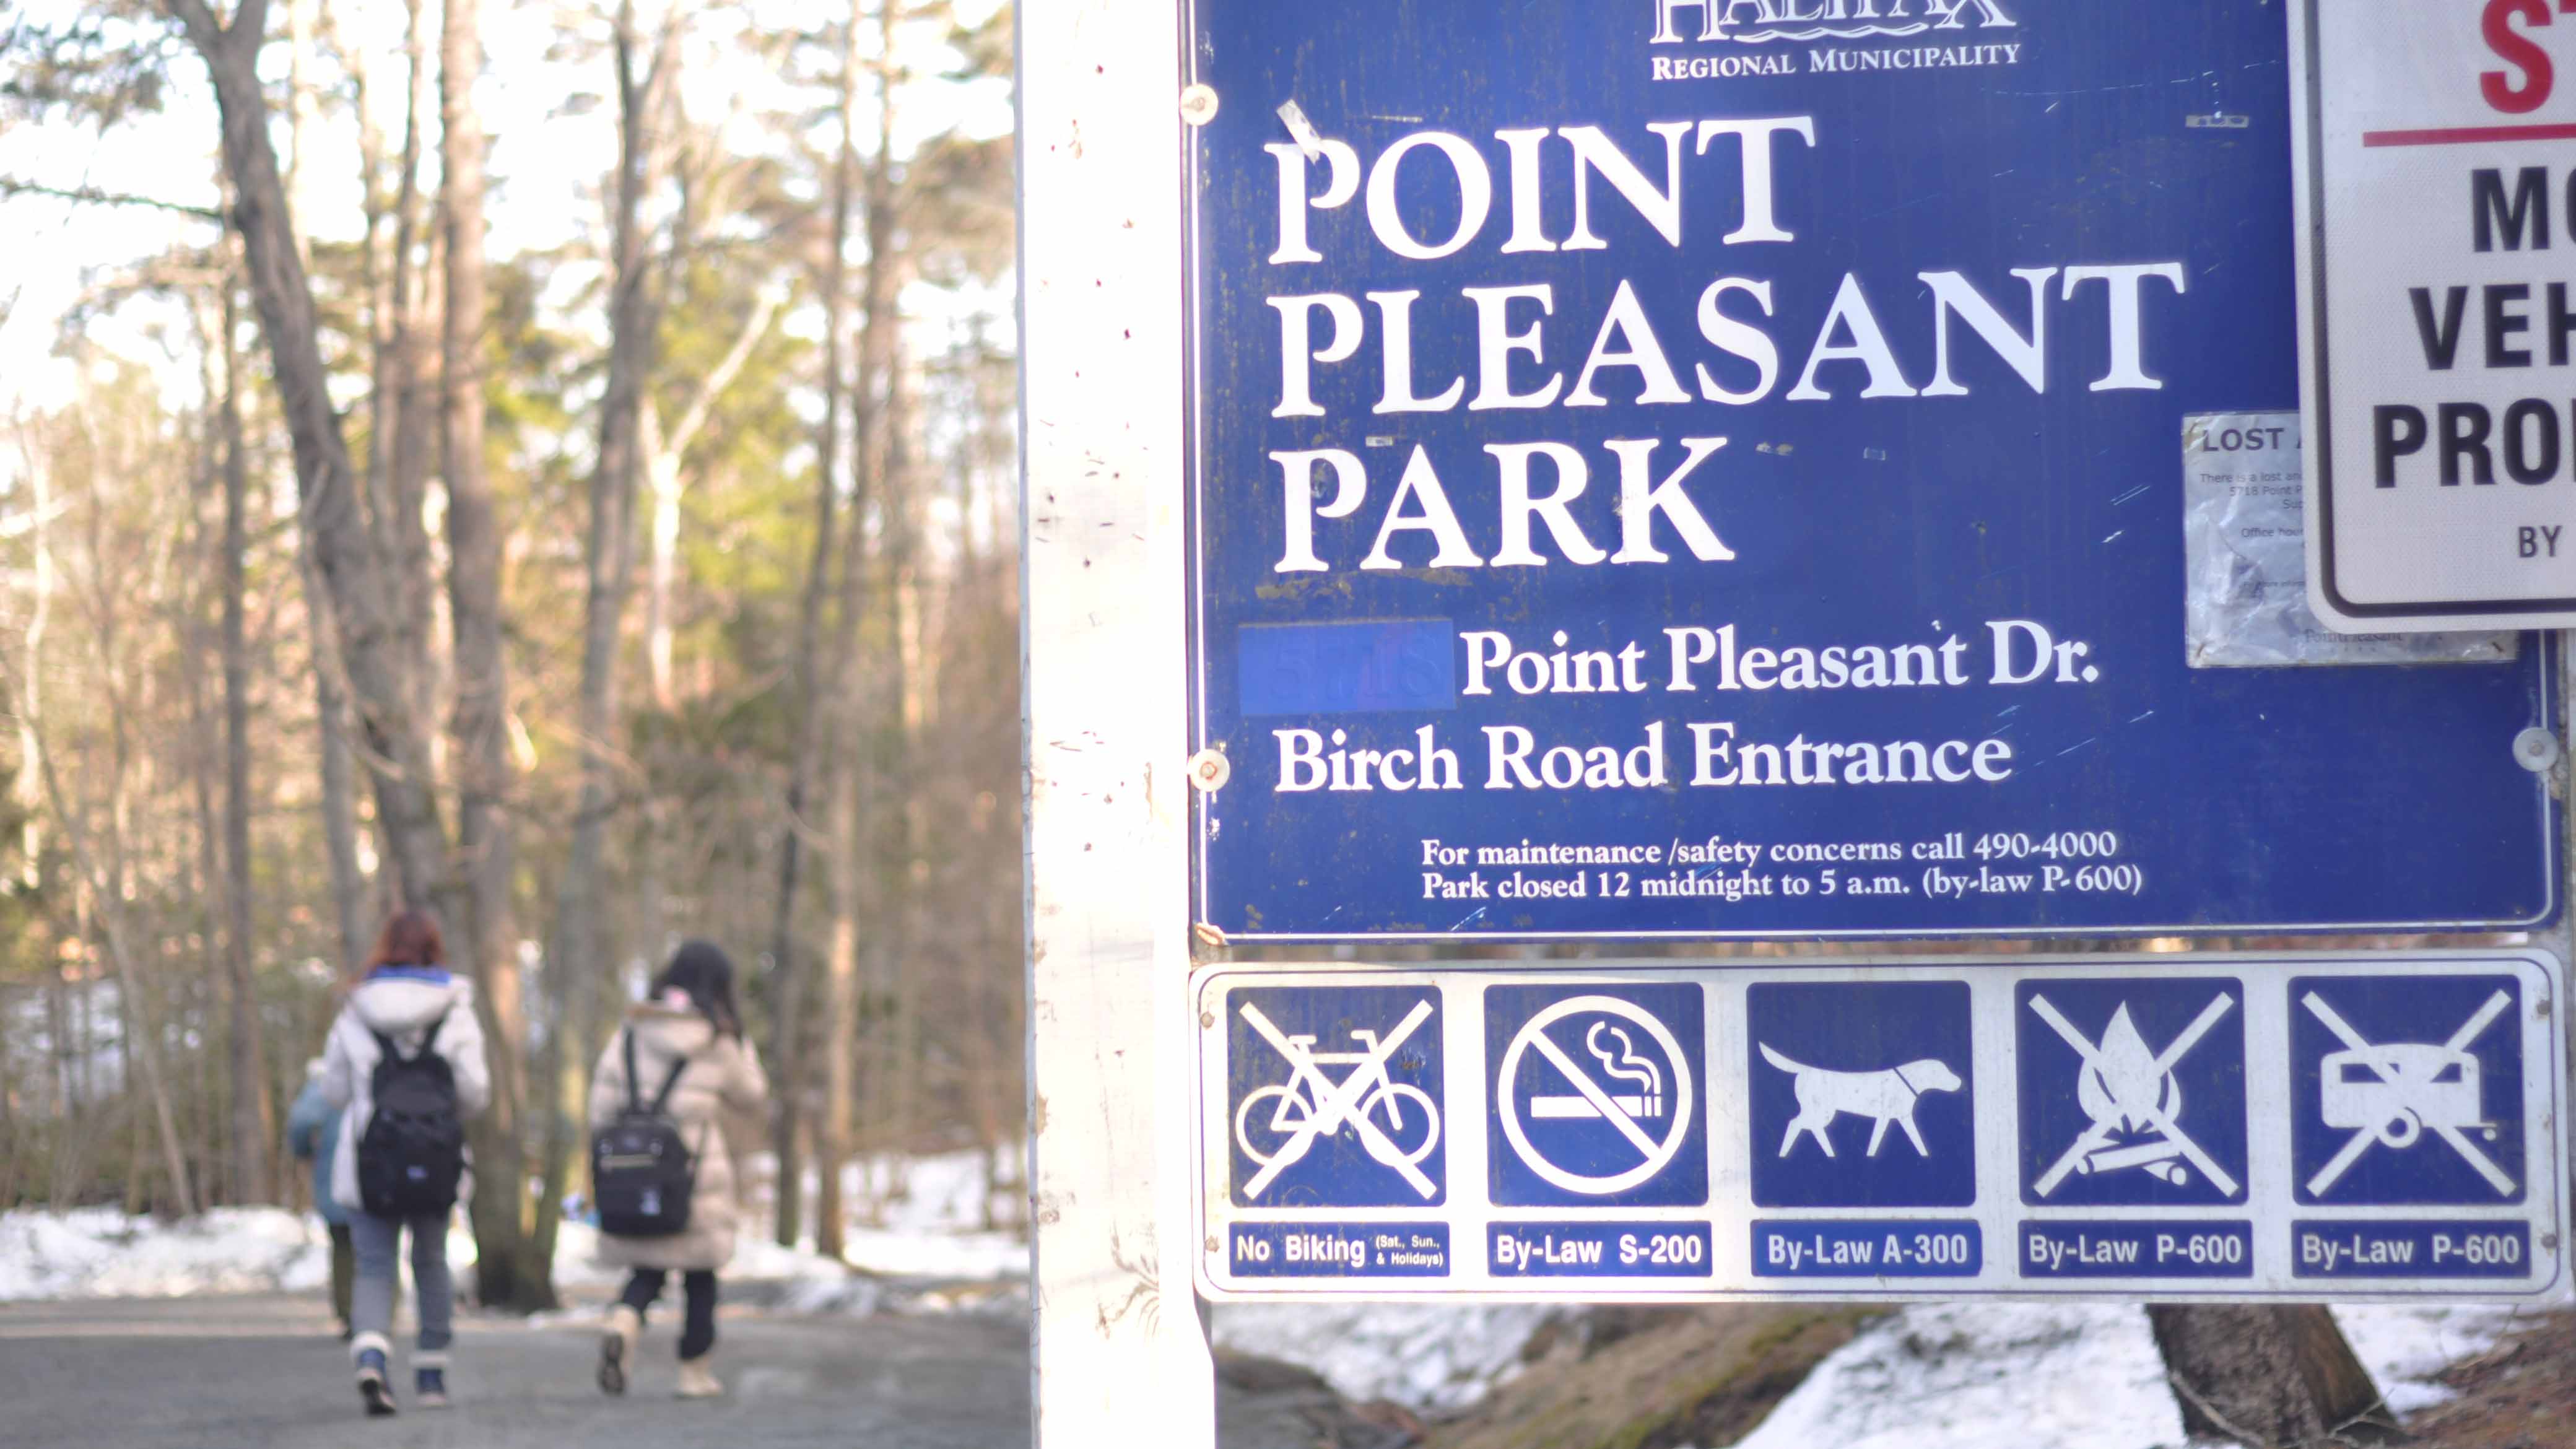 Point Pleasant Park with the By-Law